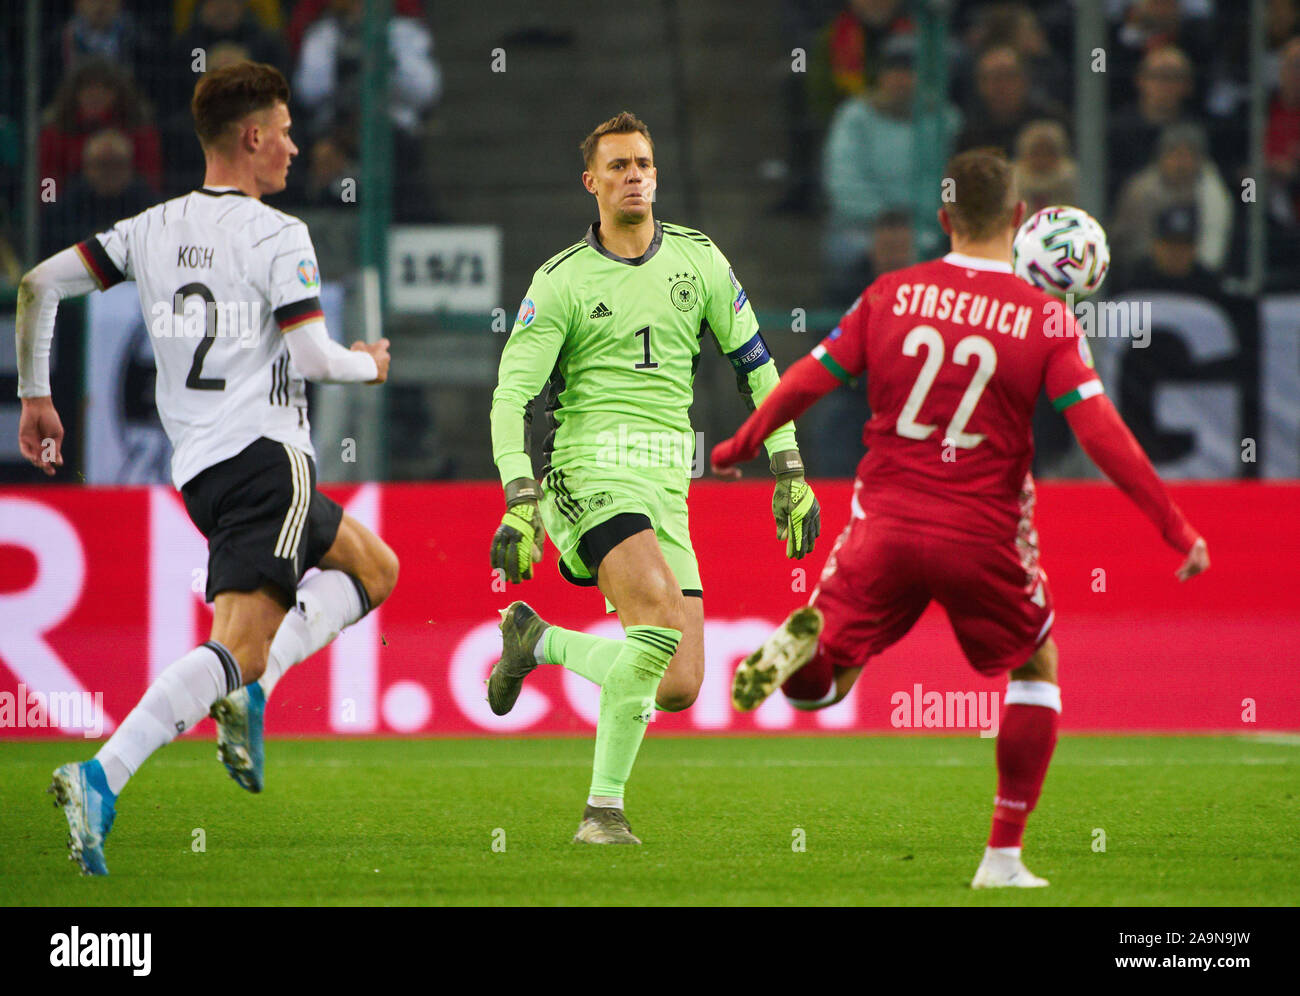 Mönchengladbach, Germany. 16th Nov 2019. Manuel NEUER, DFB 1 goalkeeper, Robin KOCH, DFB 2 compete for the ball, tackling, duel, header, zweikampf, action, fight against STASEVICH GERMANY - BELARUS Important: DFB regulations prohibit any use of photographs as image sequences and/or quasi-video. Qualification for European Championships, EM Quali, 2020 Season 2019/2020, November 16, 2019 in Mönchengladbach, Germany. Credit: Peter Schatz/Alamy Live News Stock Photo